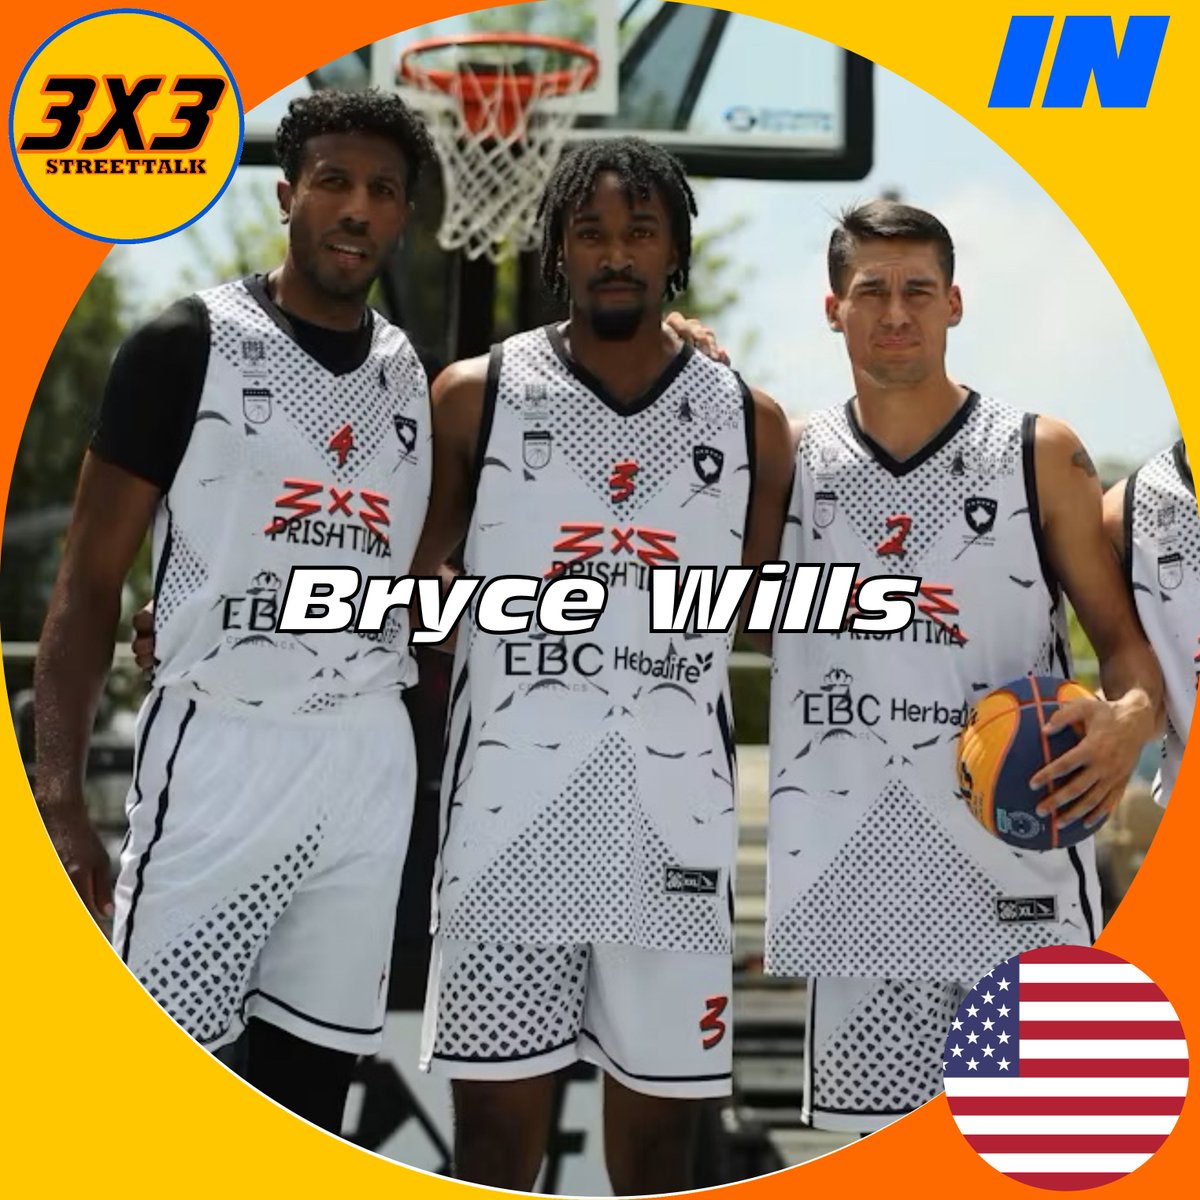 A last minute roster change for Miami, as Kareem Maddox will not be playing. Bryce Wills will step in and make his World Tour debut, after having represented Miami at the Pristina Challenger last year. #3x3wt #3x3 #3x3basketball #FIBA3x3 #3x3WTUtsunomiya